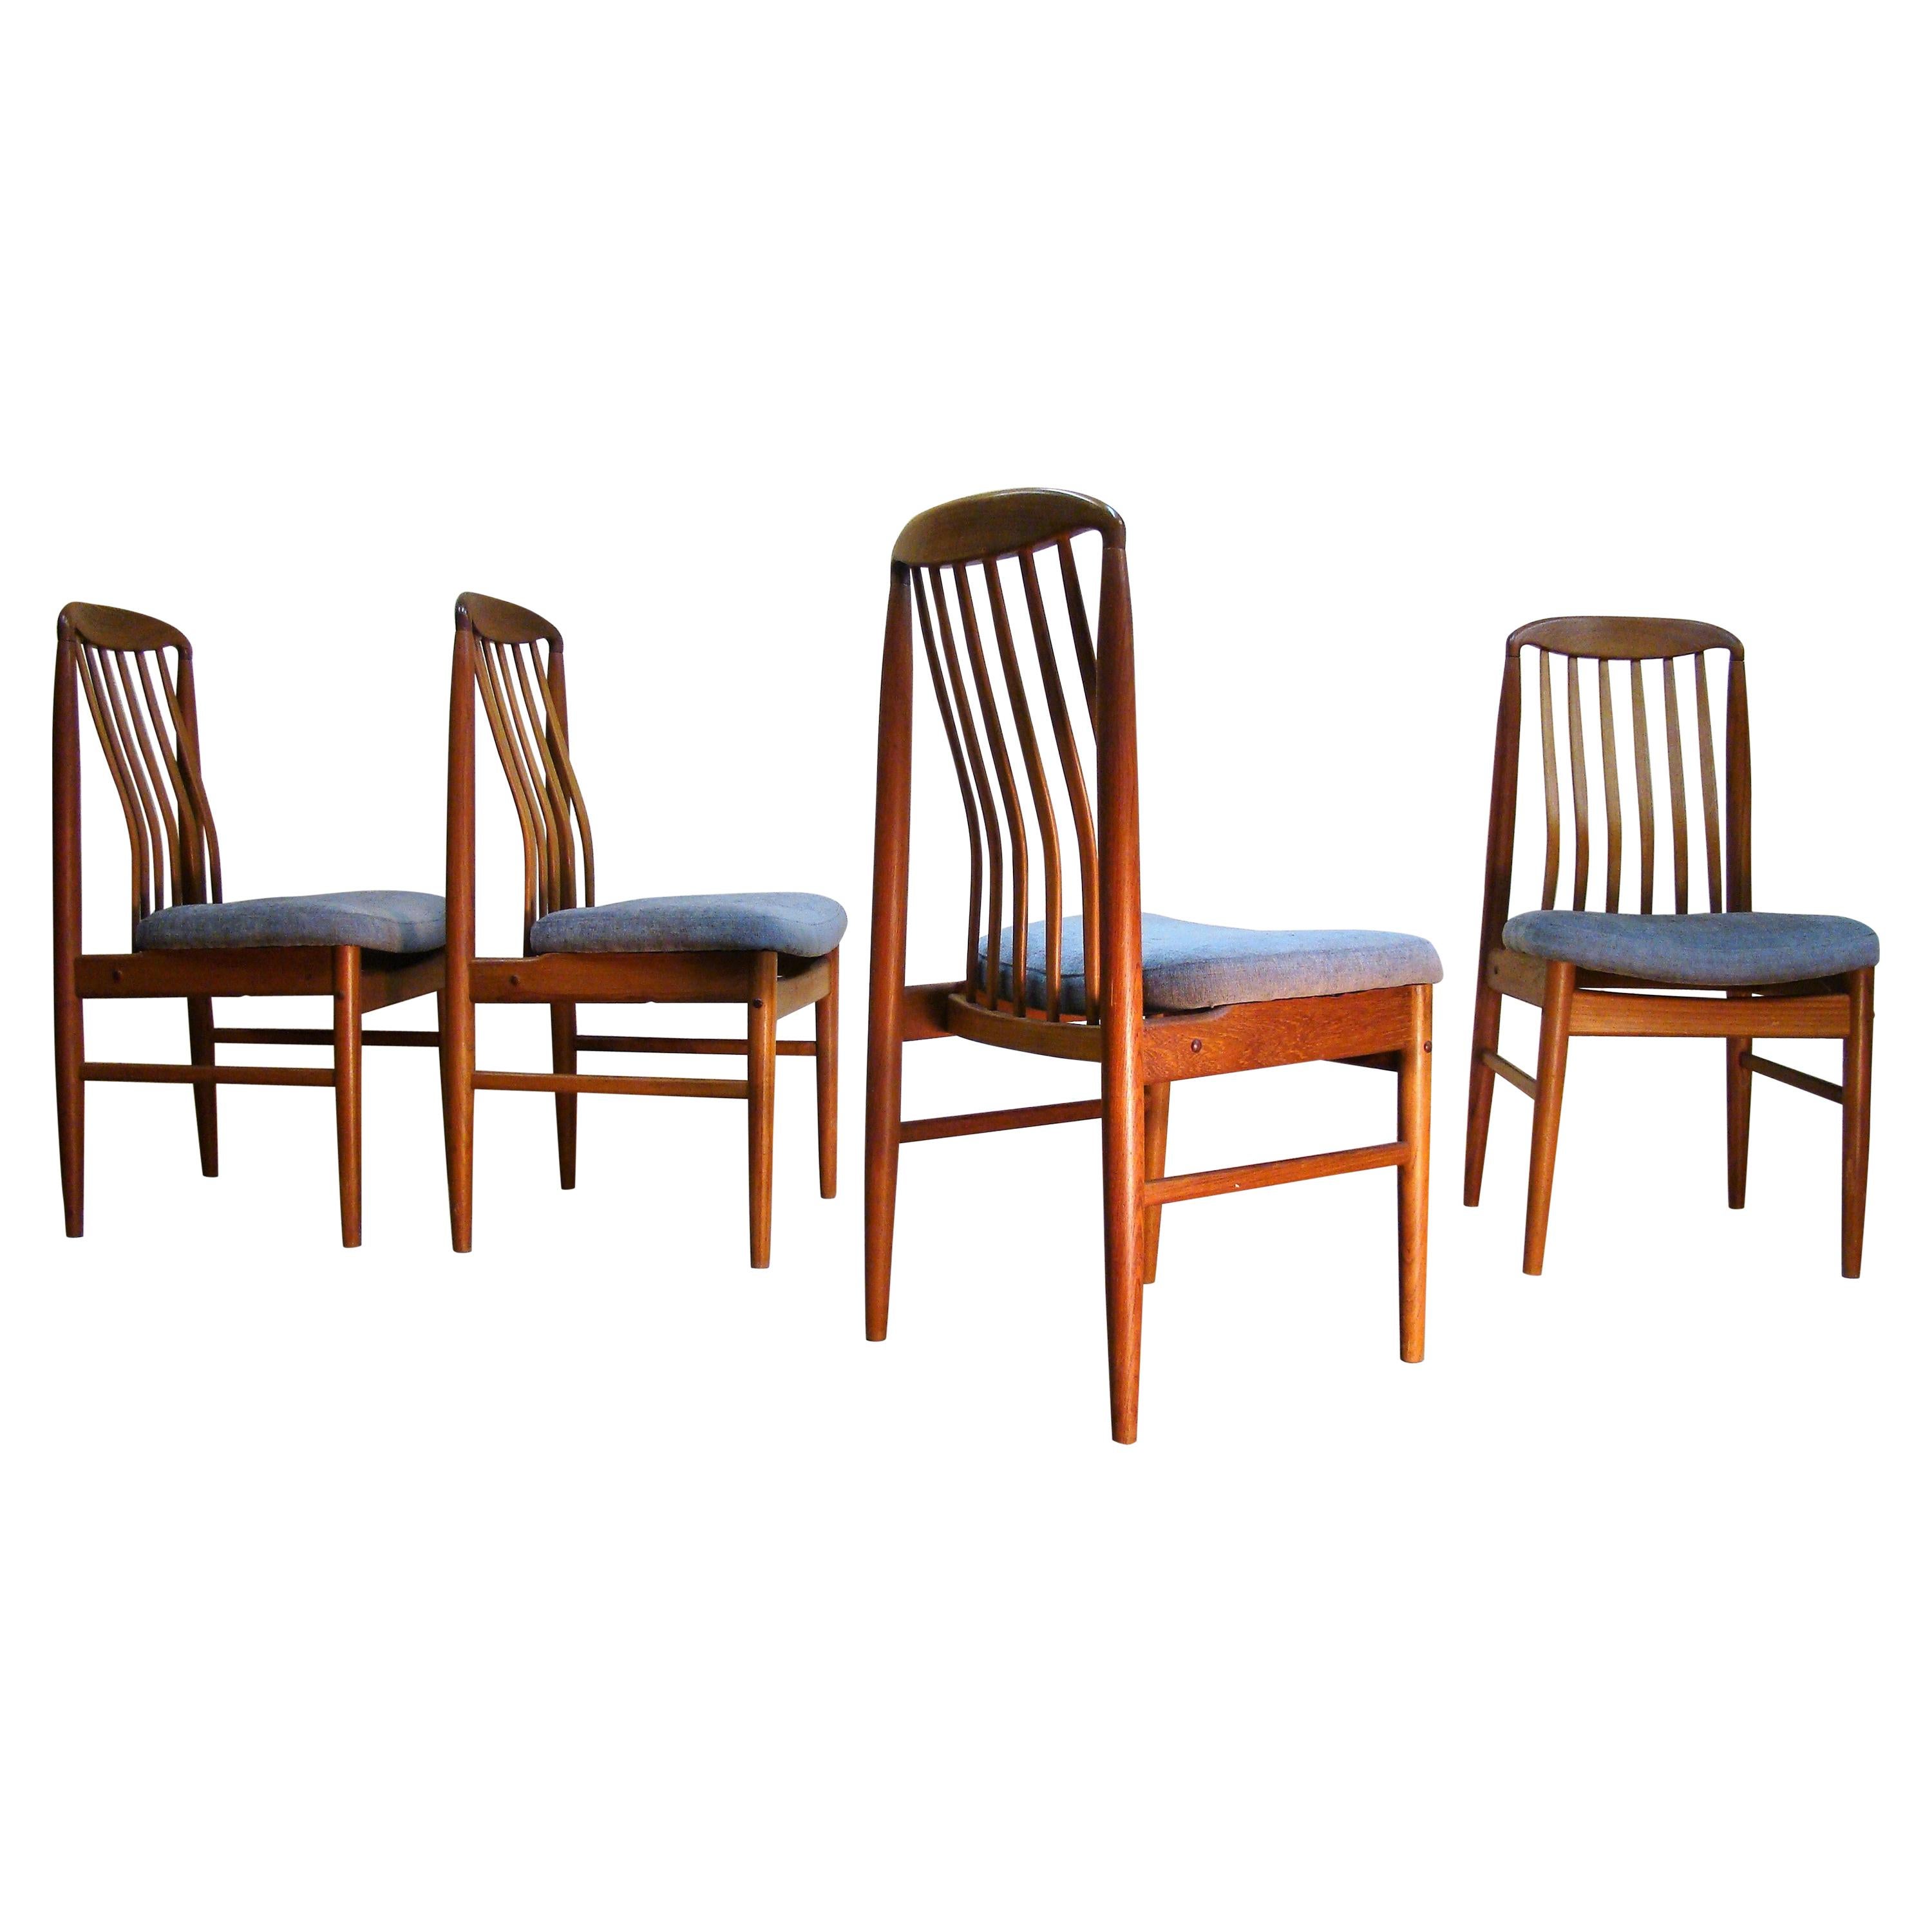 Set of Four Teak High-Back Danish Dining Chairs by Benny Linden, 1960s